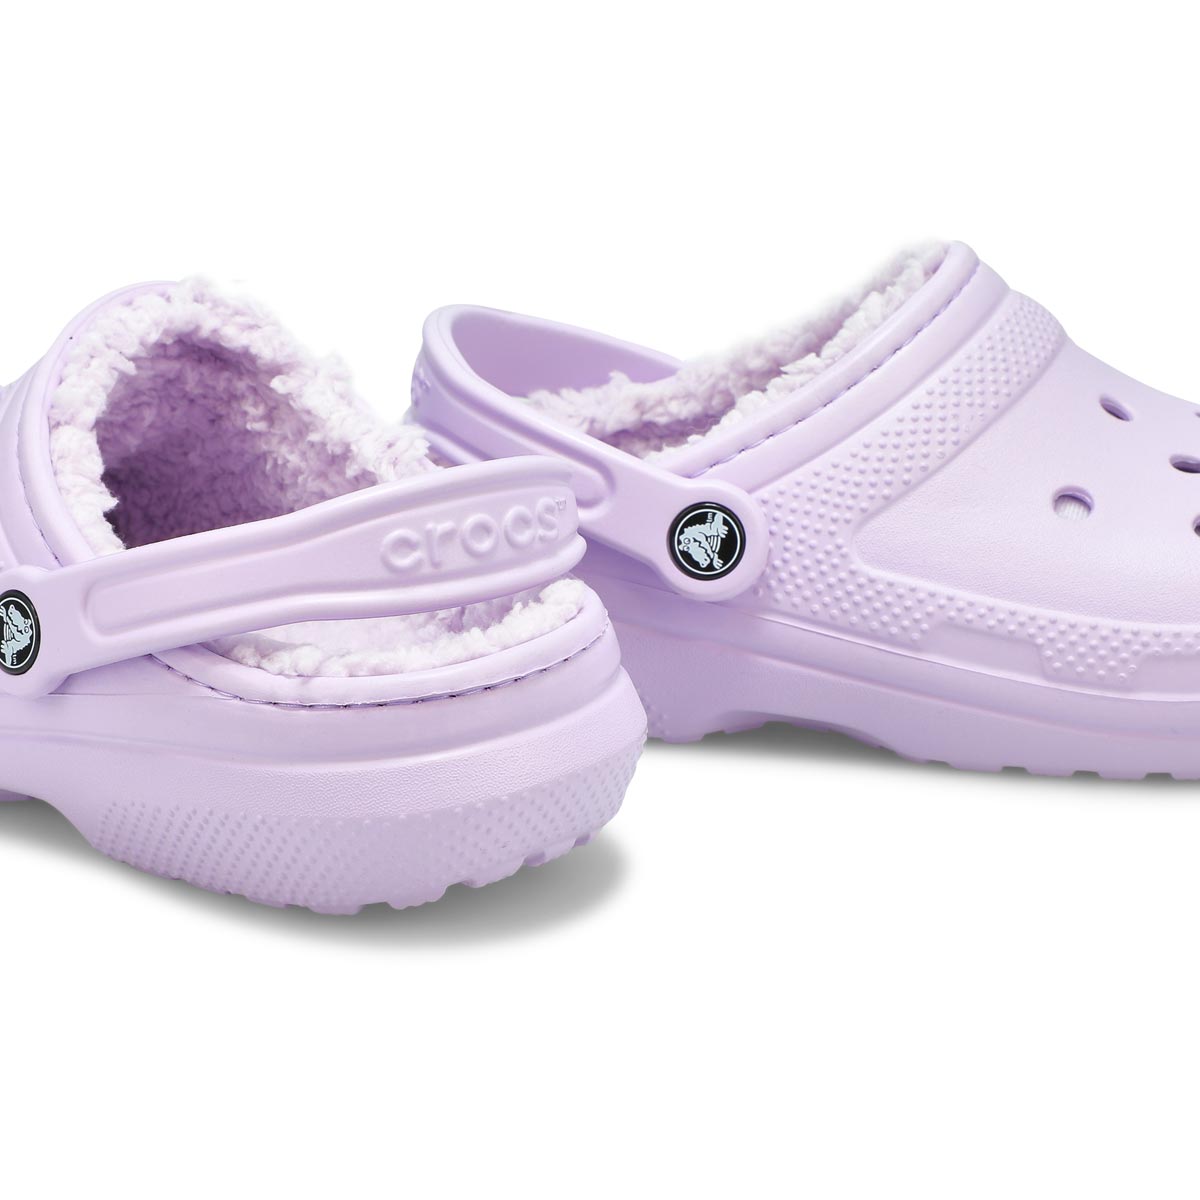 Women's Classic Lined Comfort Clog - Lavender